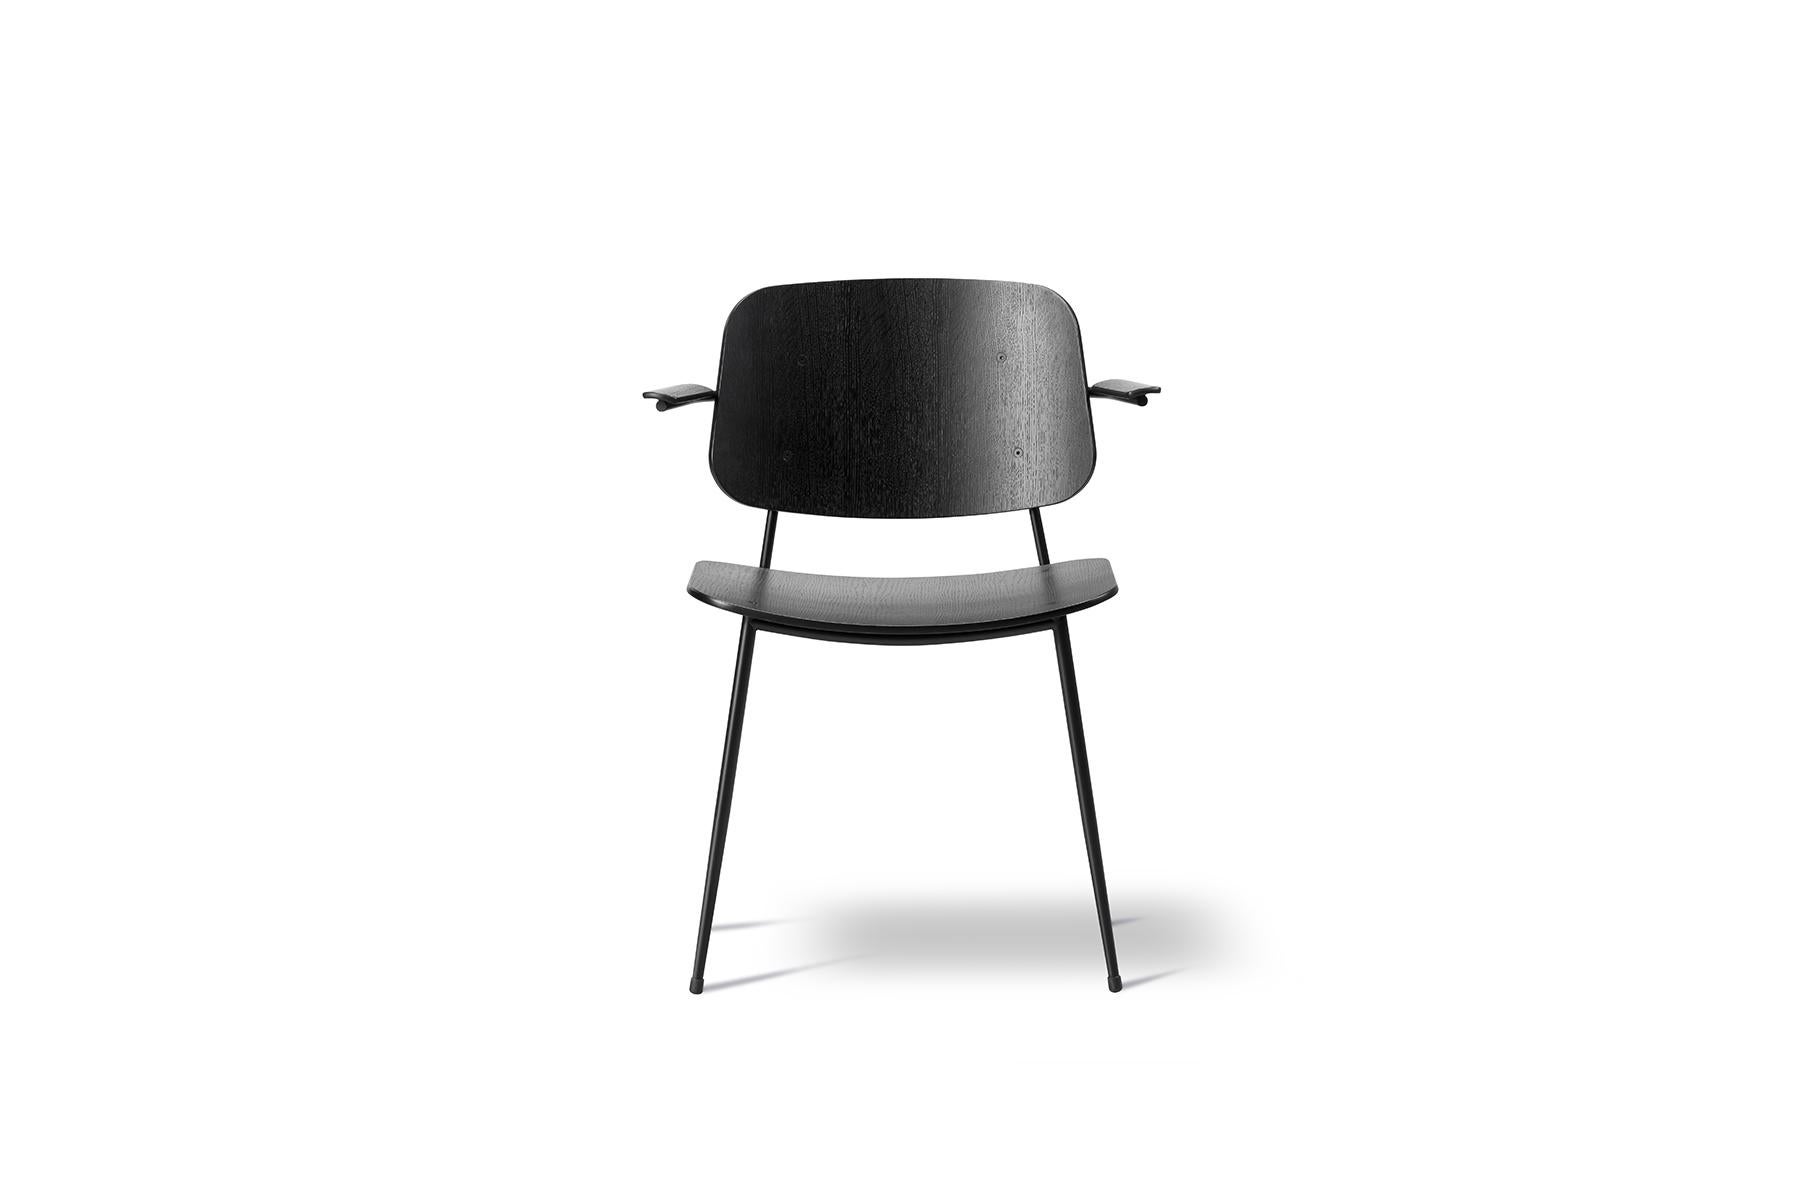 In 1952 Mogensen built onto the Søborg series with a steel-framed version, a design that he viewed as a reflection on international modernism. The generous back and seat with optional upholstery provides for many hours of use.